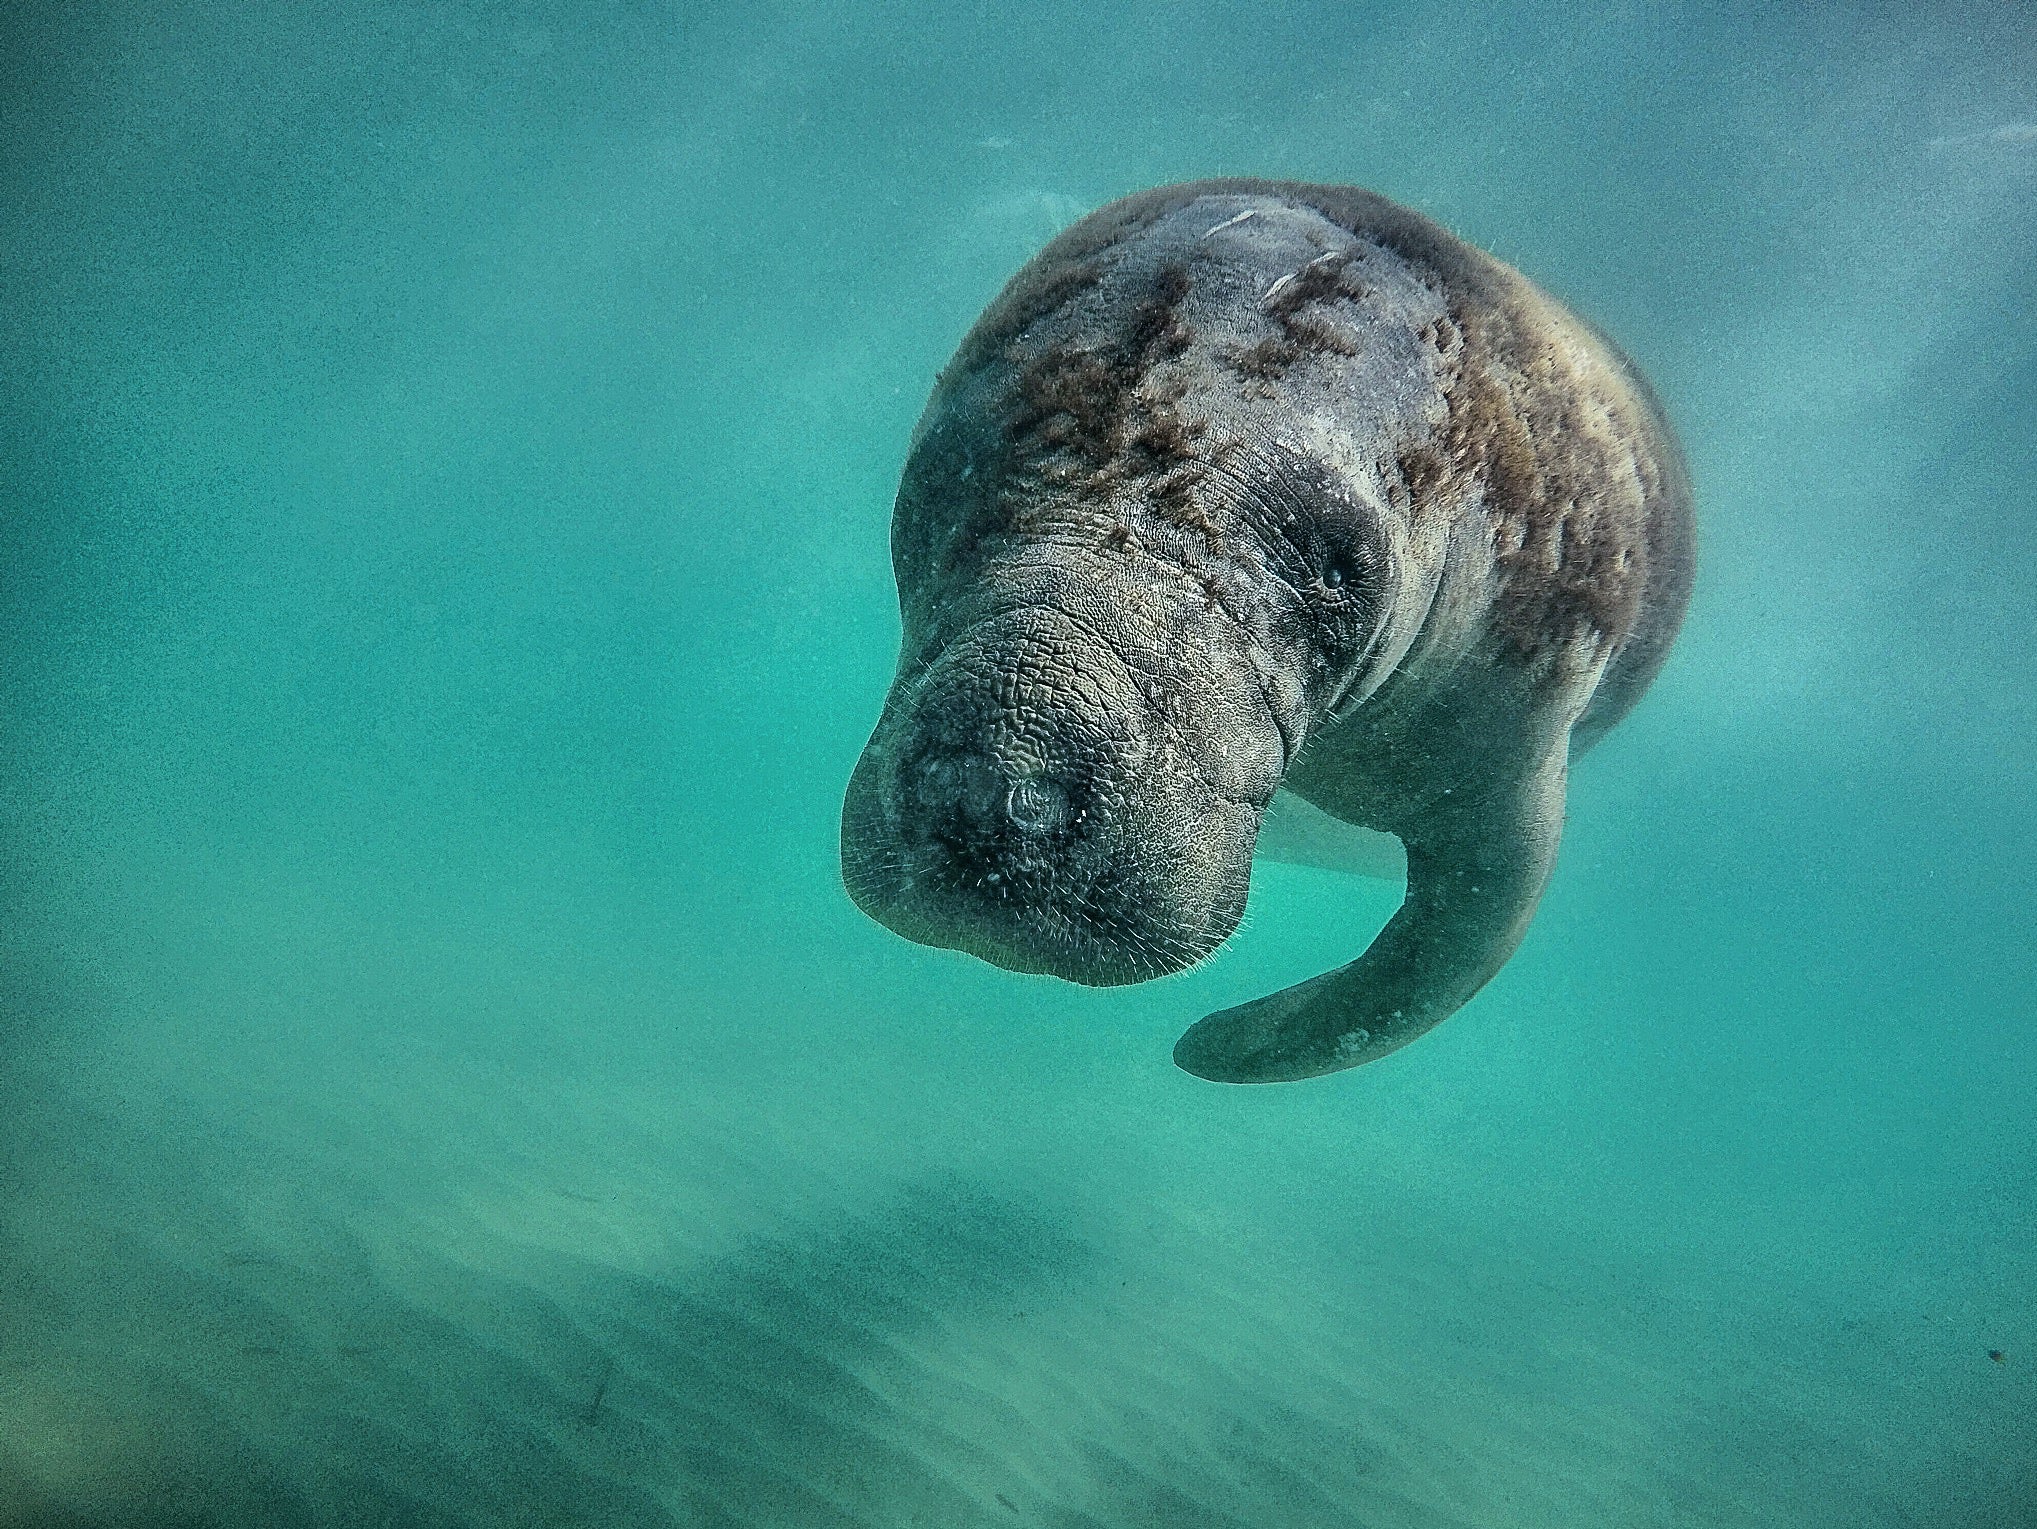 A manatee off the coast of Miami, Florida, where annual records for manatee deaths have been broken. Officials are now turning to feeding the creatures themselves